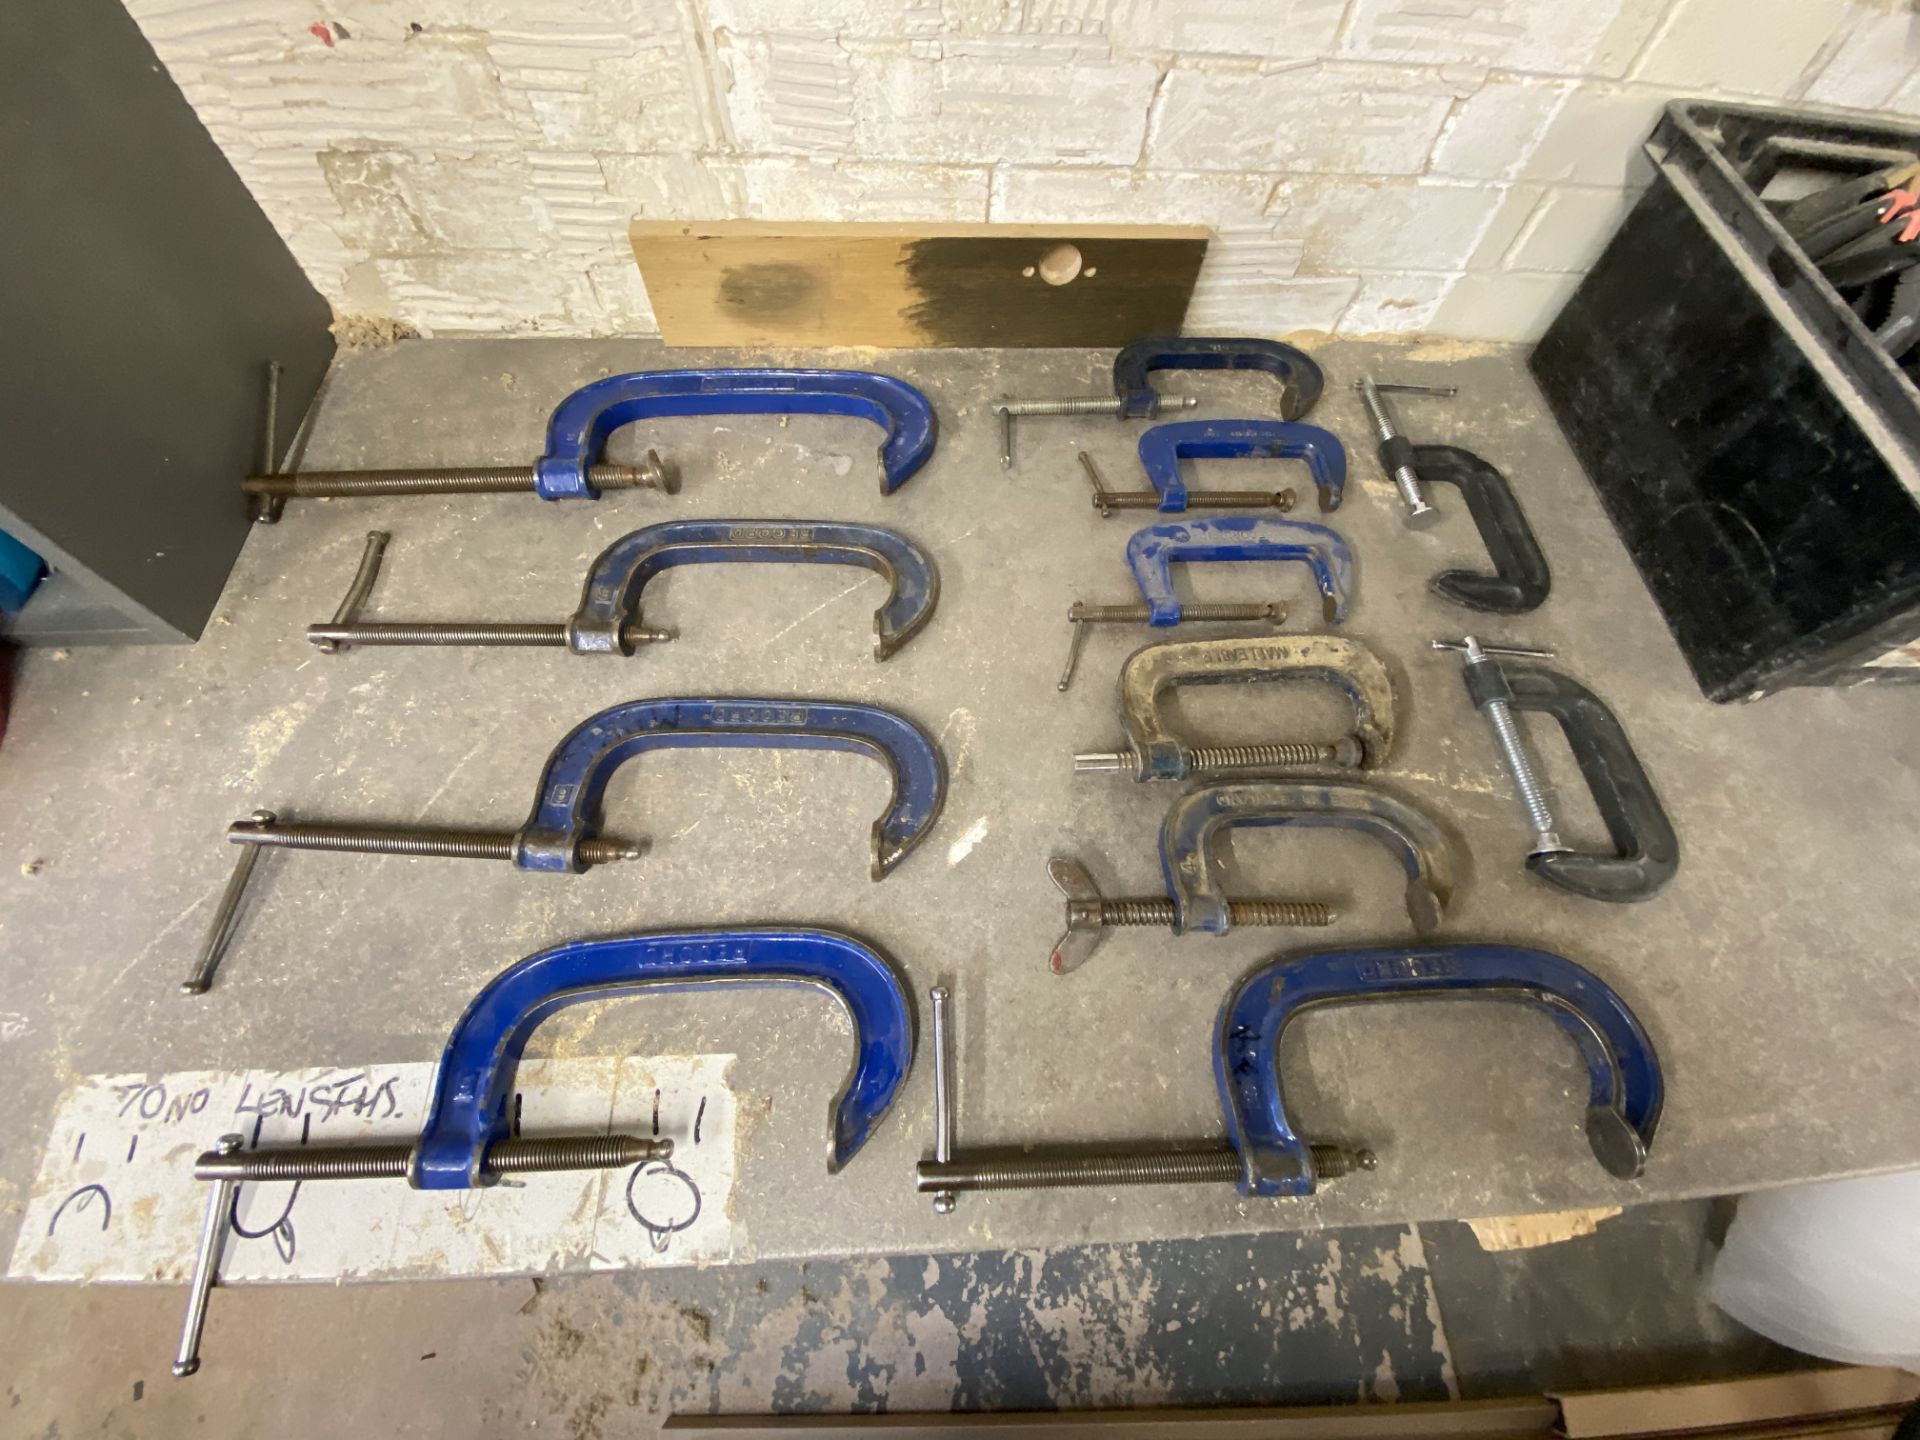 12 x G clamps in various sizes